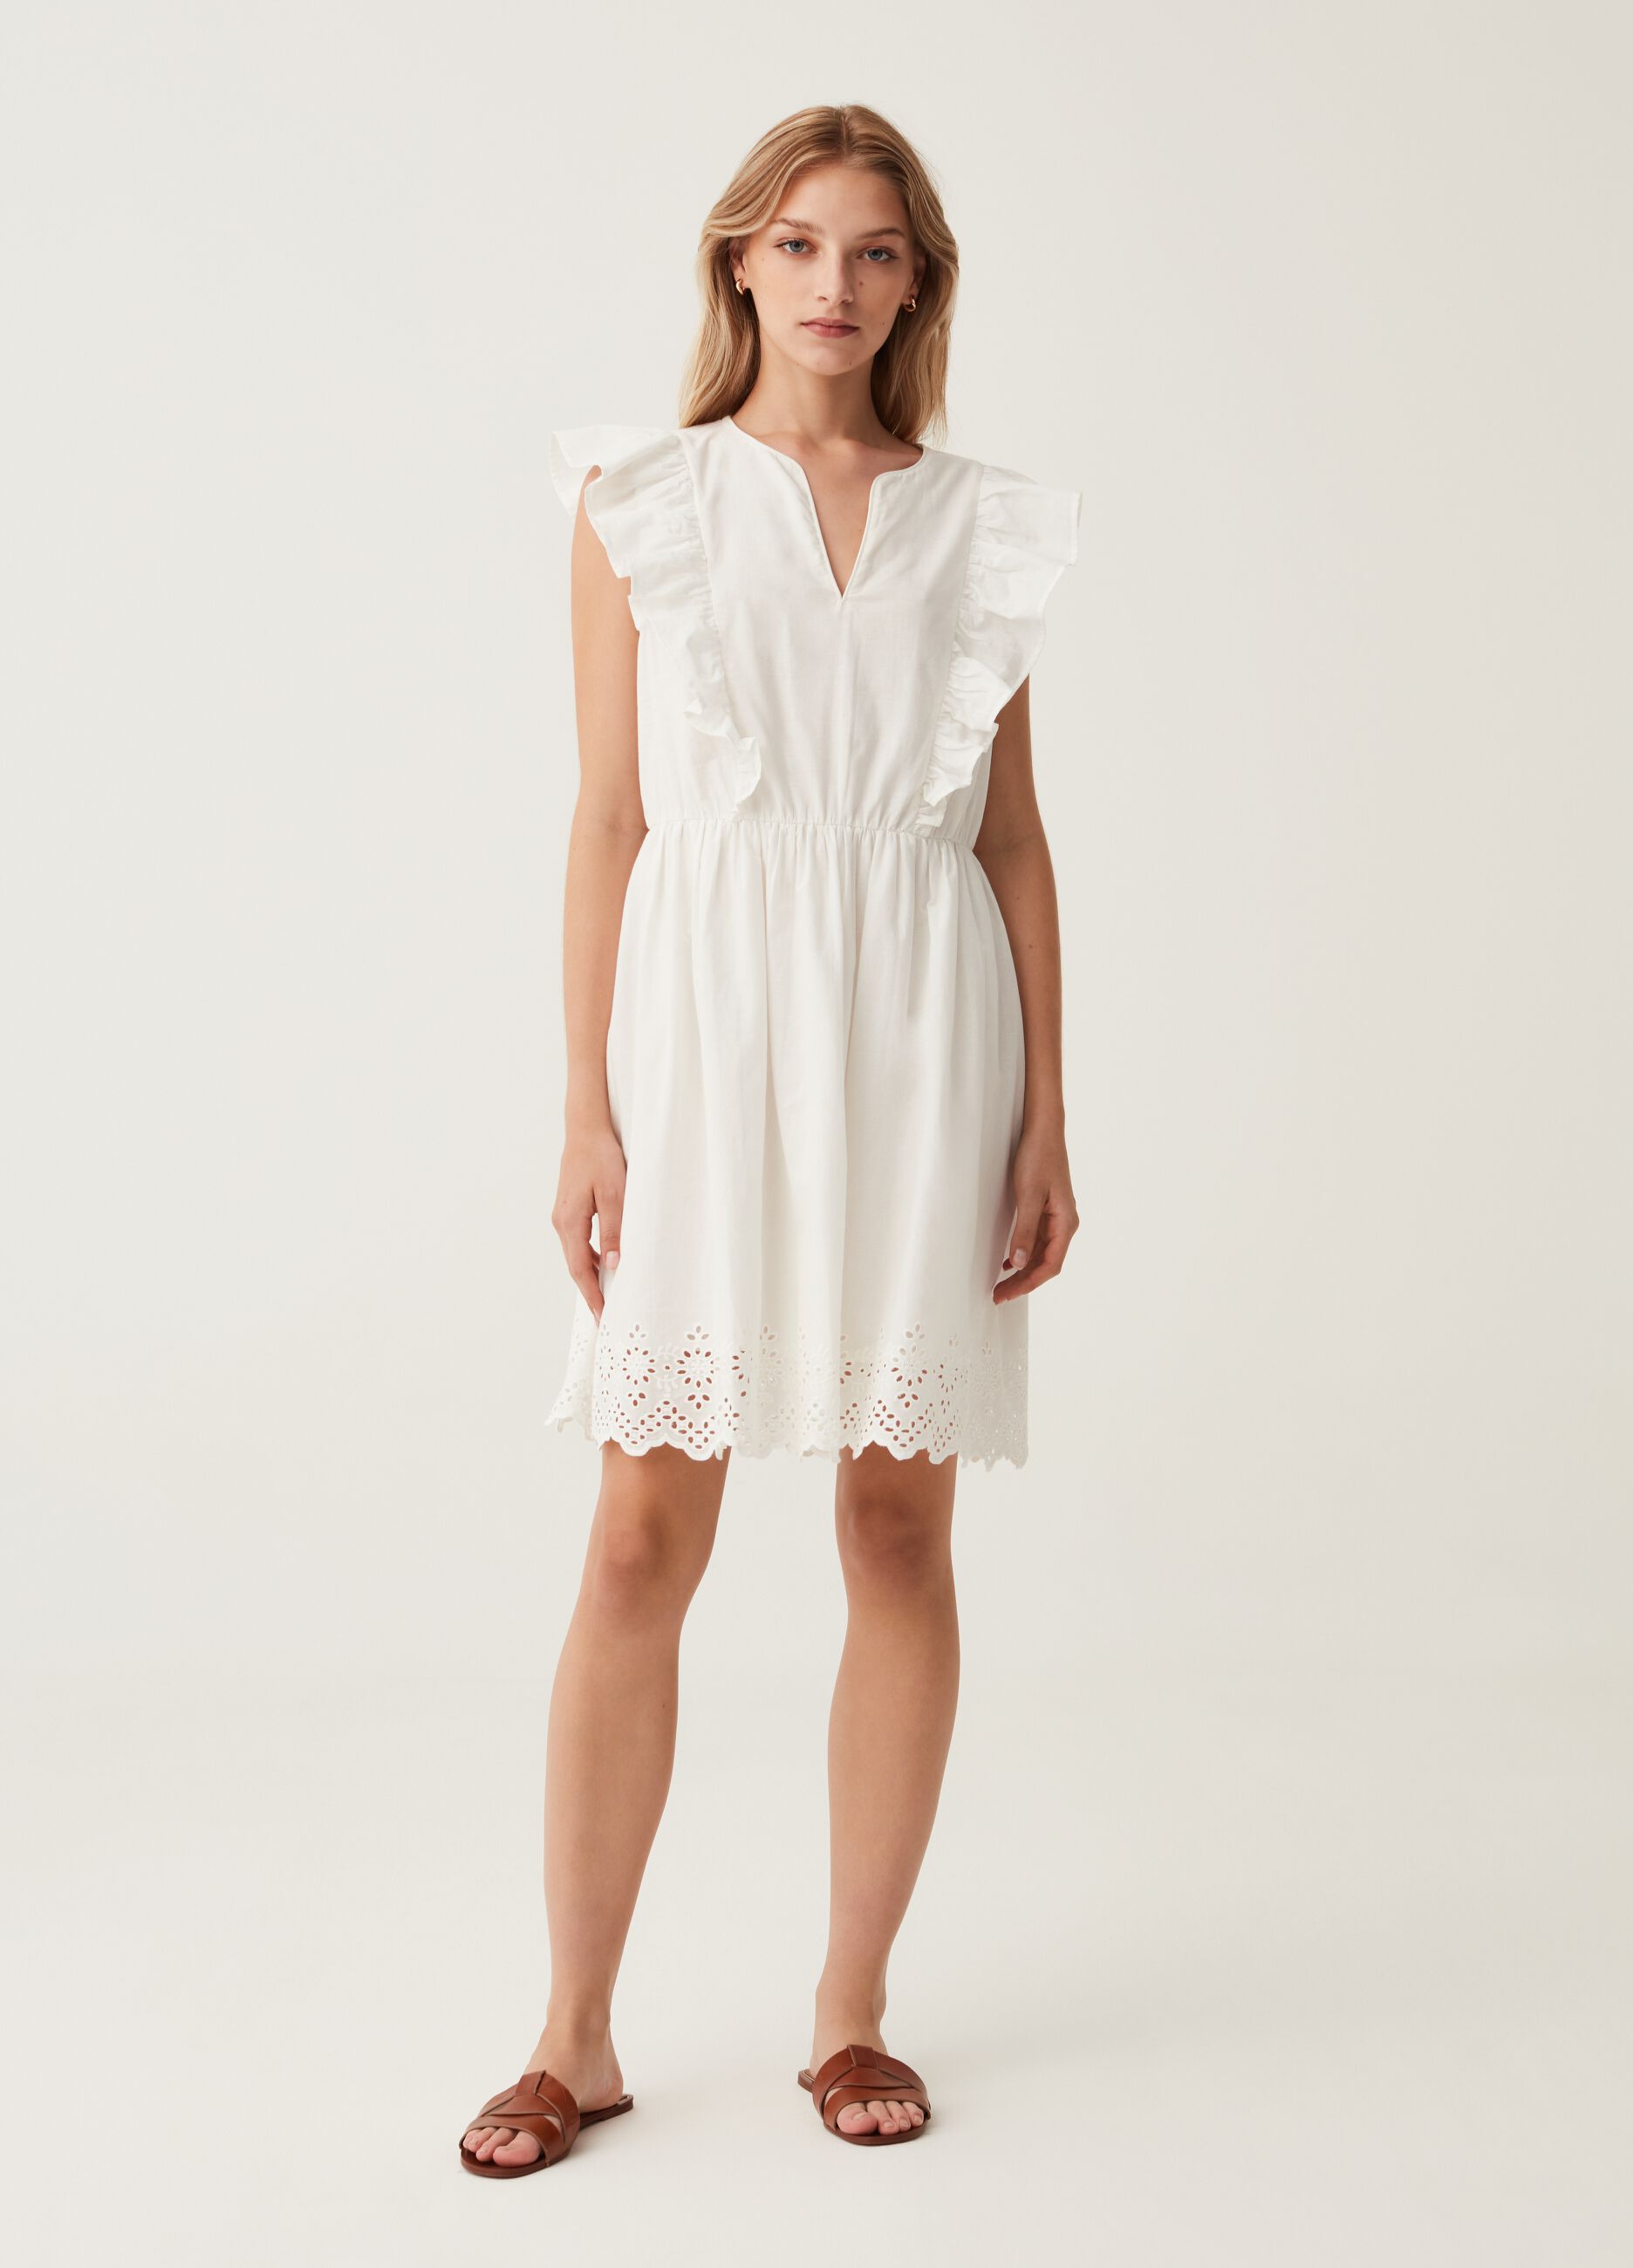 Short dress with broderie anglaise edging